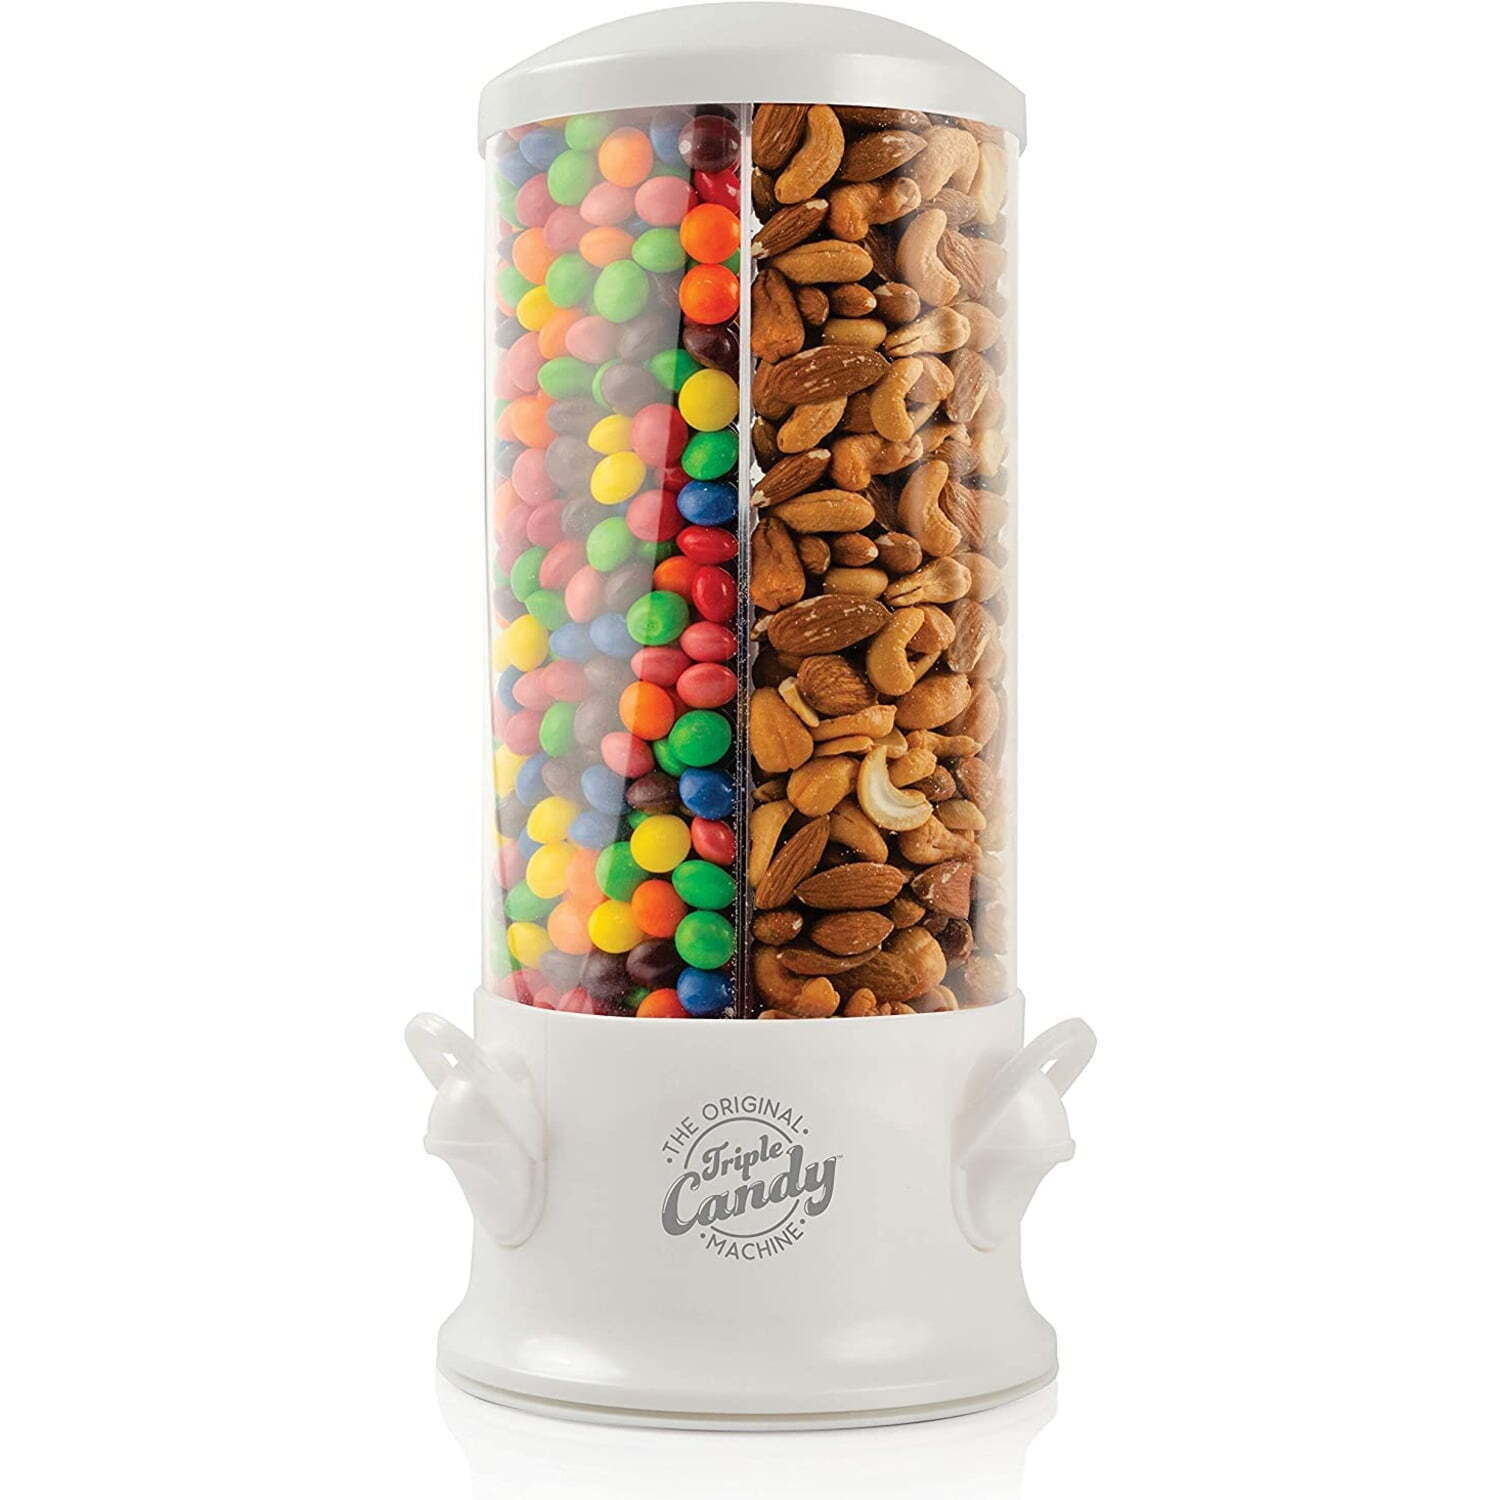 Rotating Triple Candy Dispenser 360 degree rotating base-Easy To Open and Fill